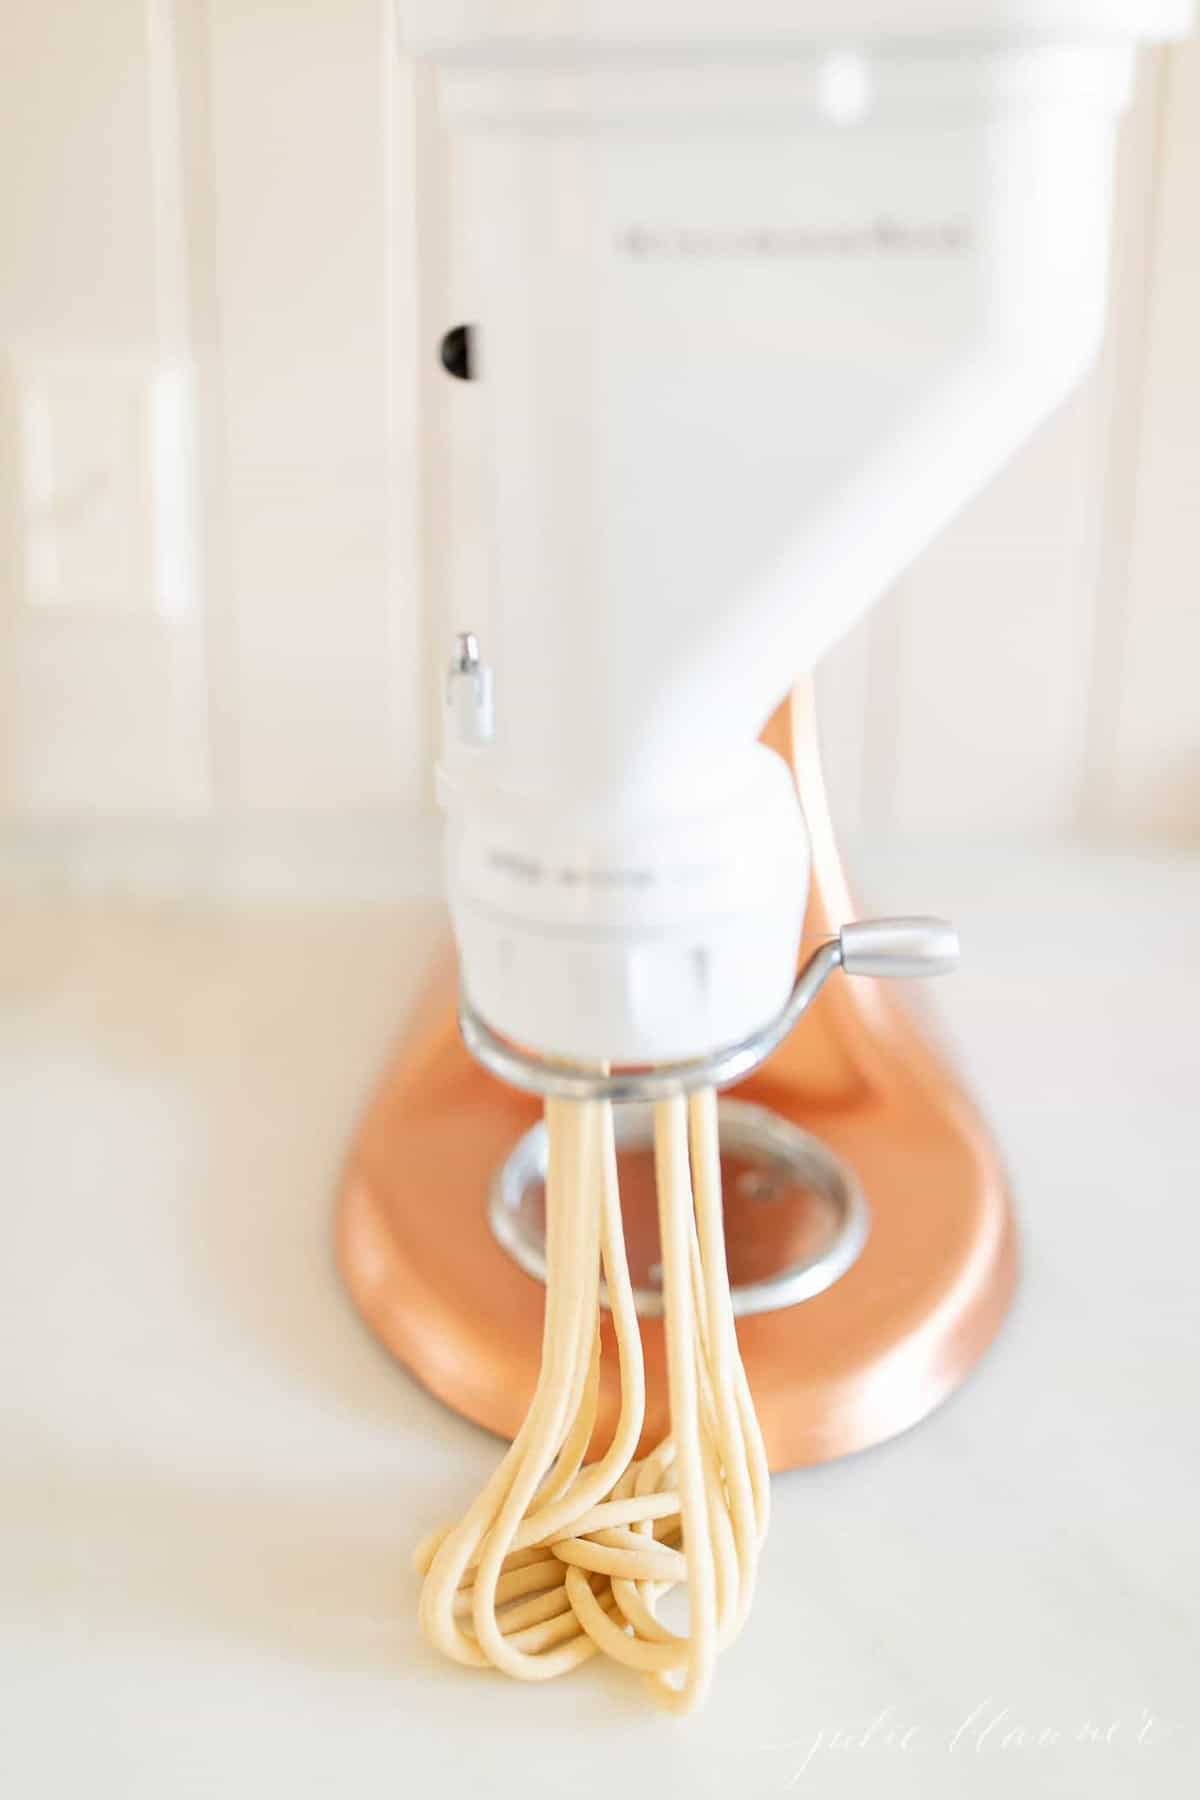 A kitchenaid stand mixer with a pasta attachment, bucatini noodles coming out